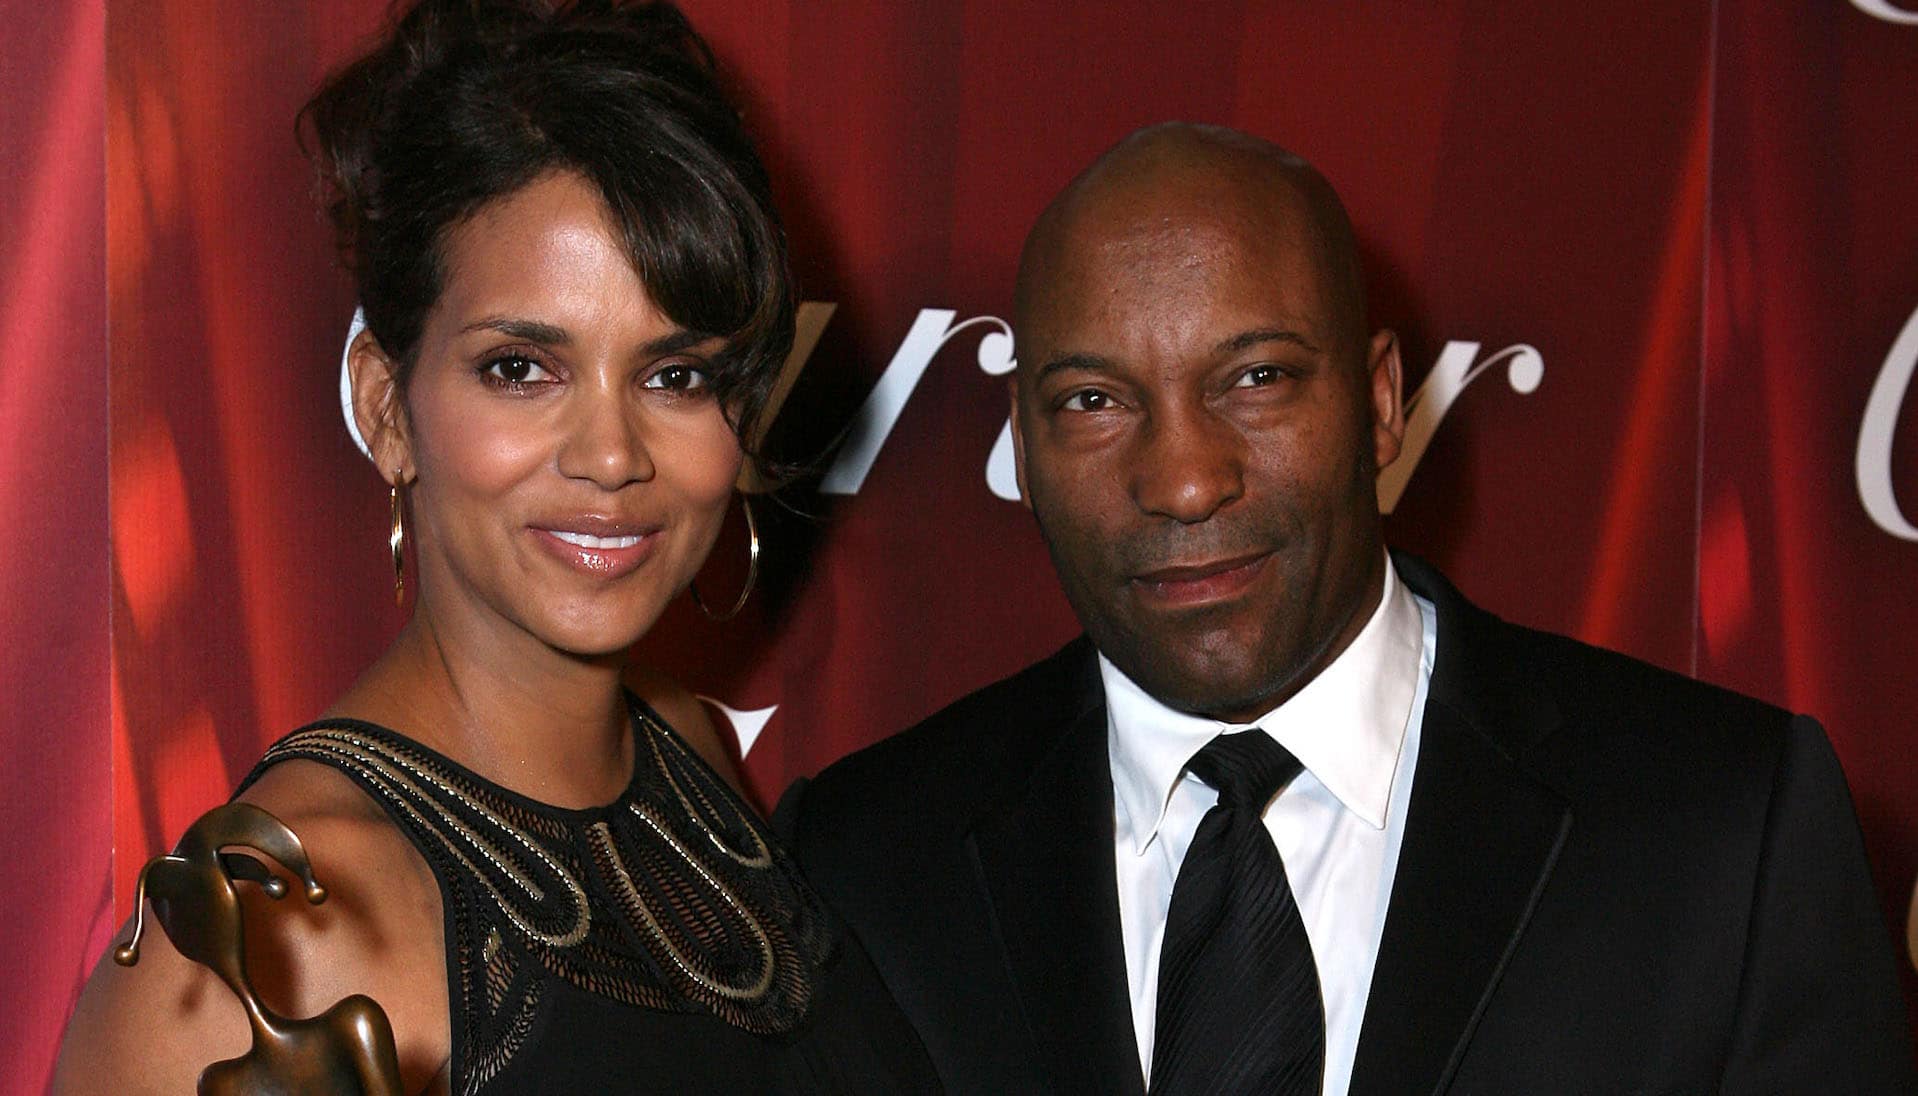 Halle Berry Reflects On John Singleton’s Friendship: ‘He’s One Of The Good Guys’